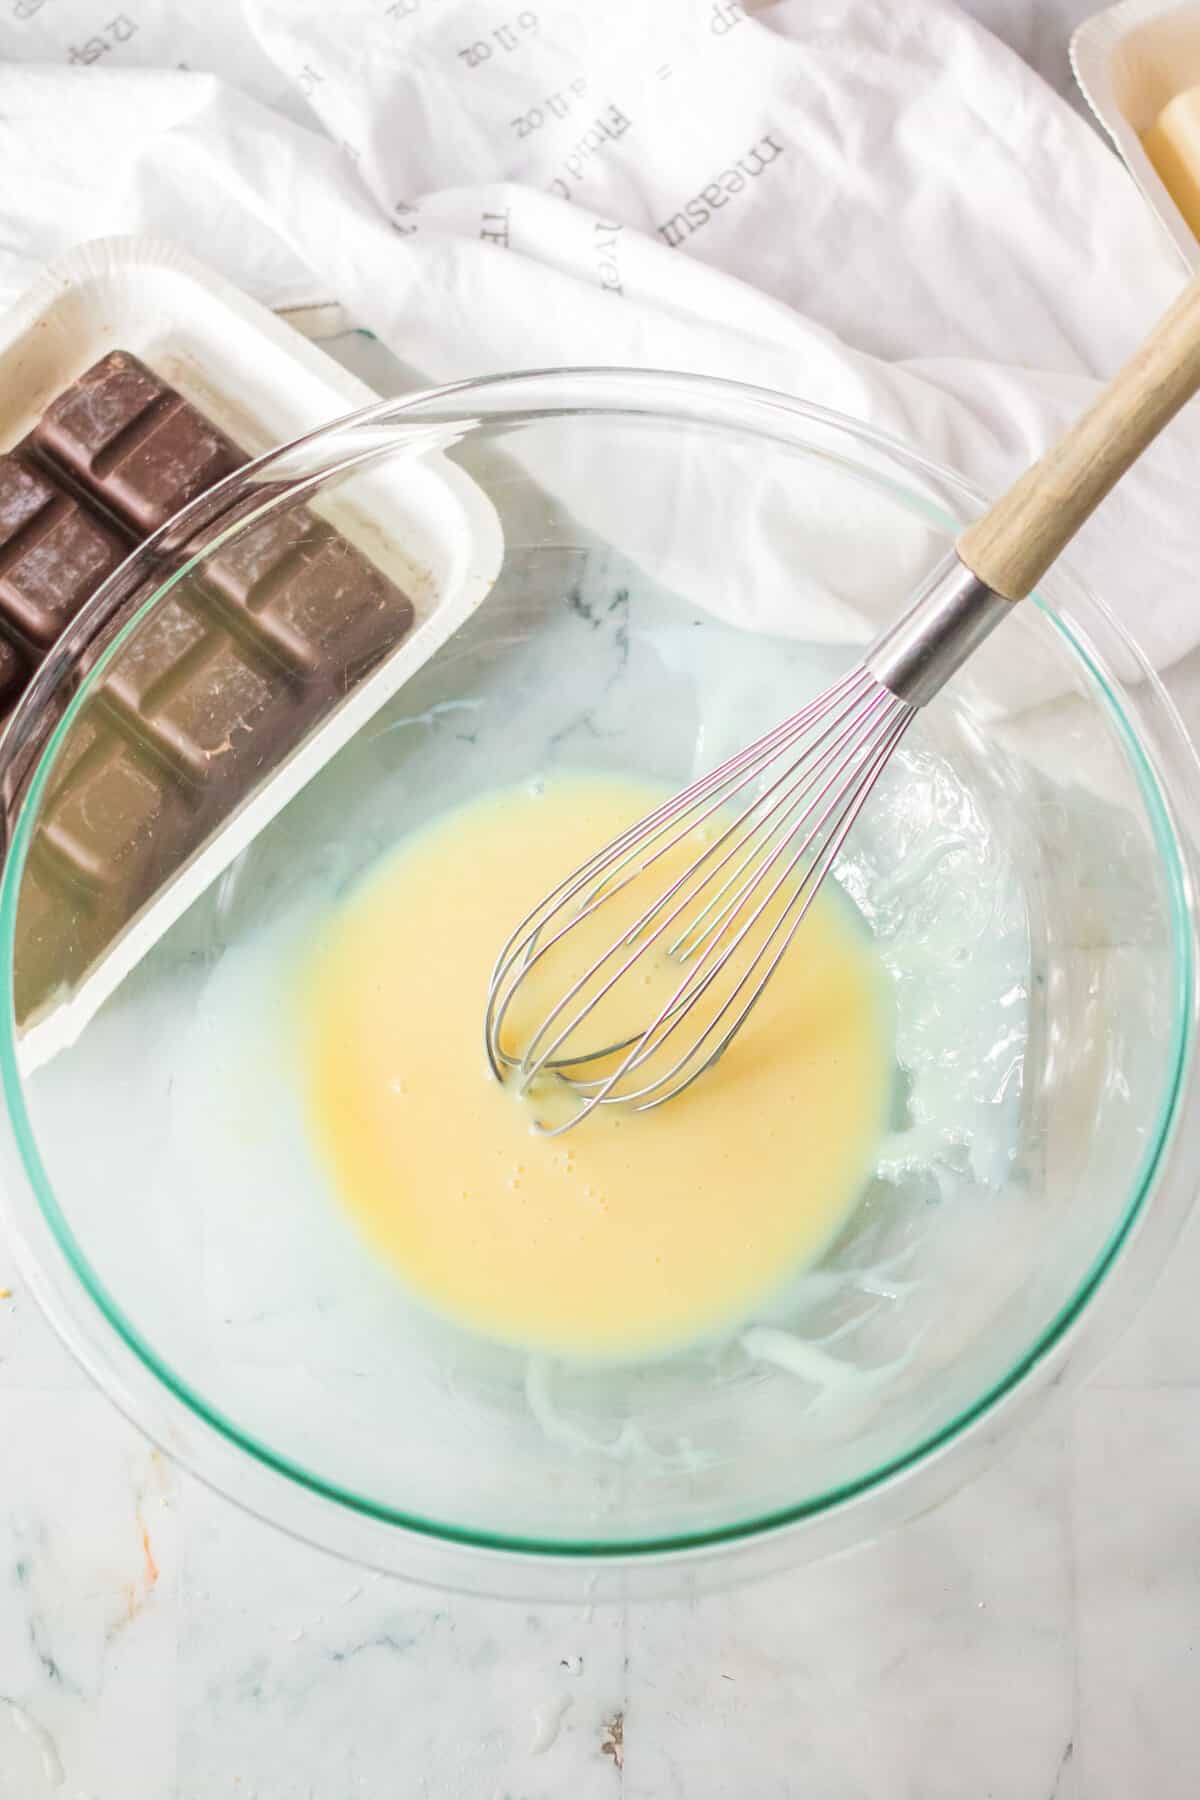 Sweetened condensed milk and peppermint extract combined with a wire whisk in glass mixing bowl.